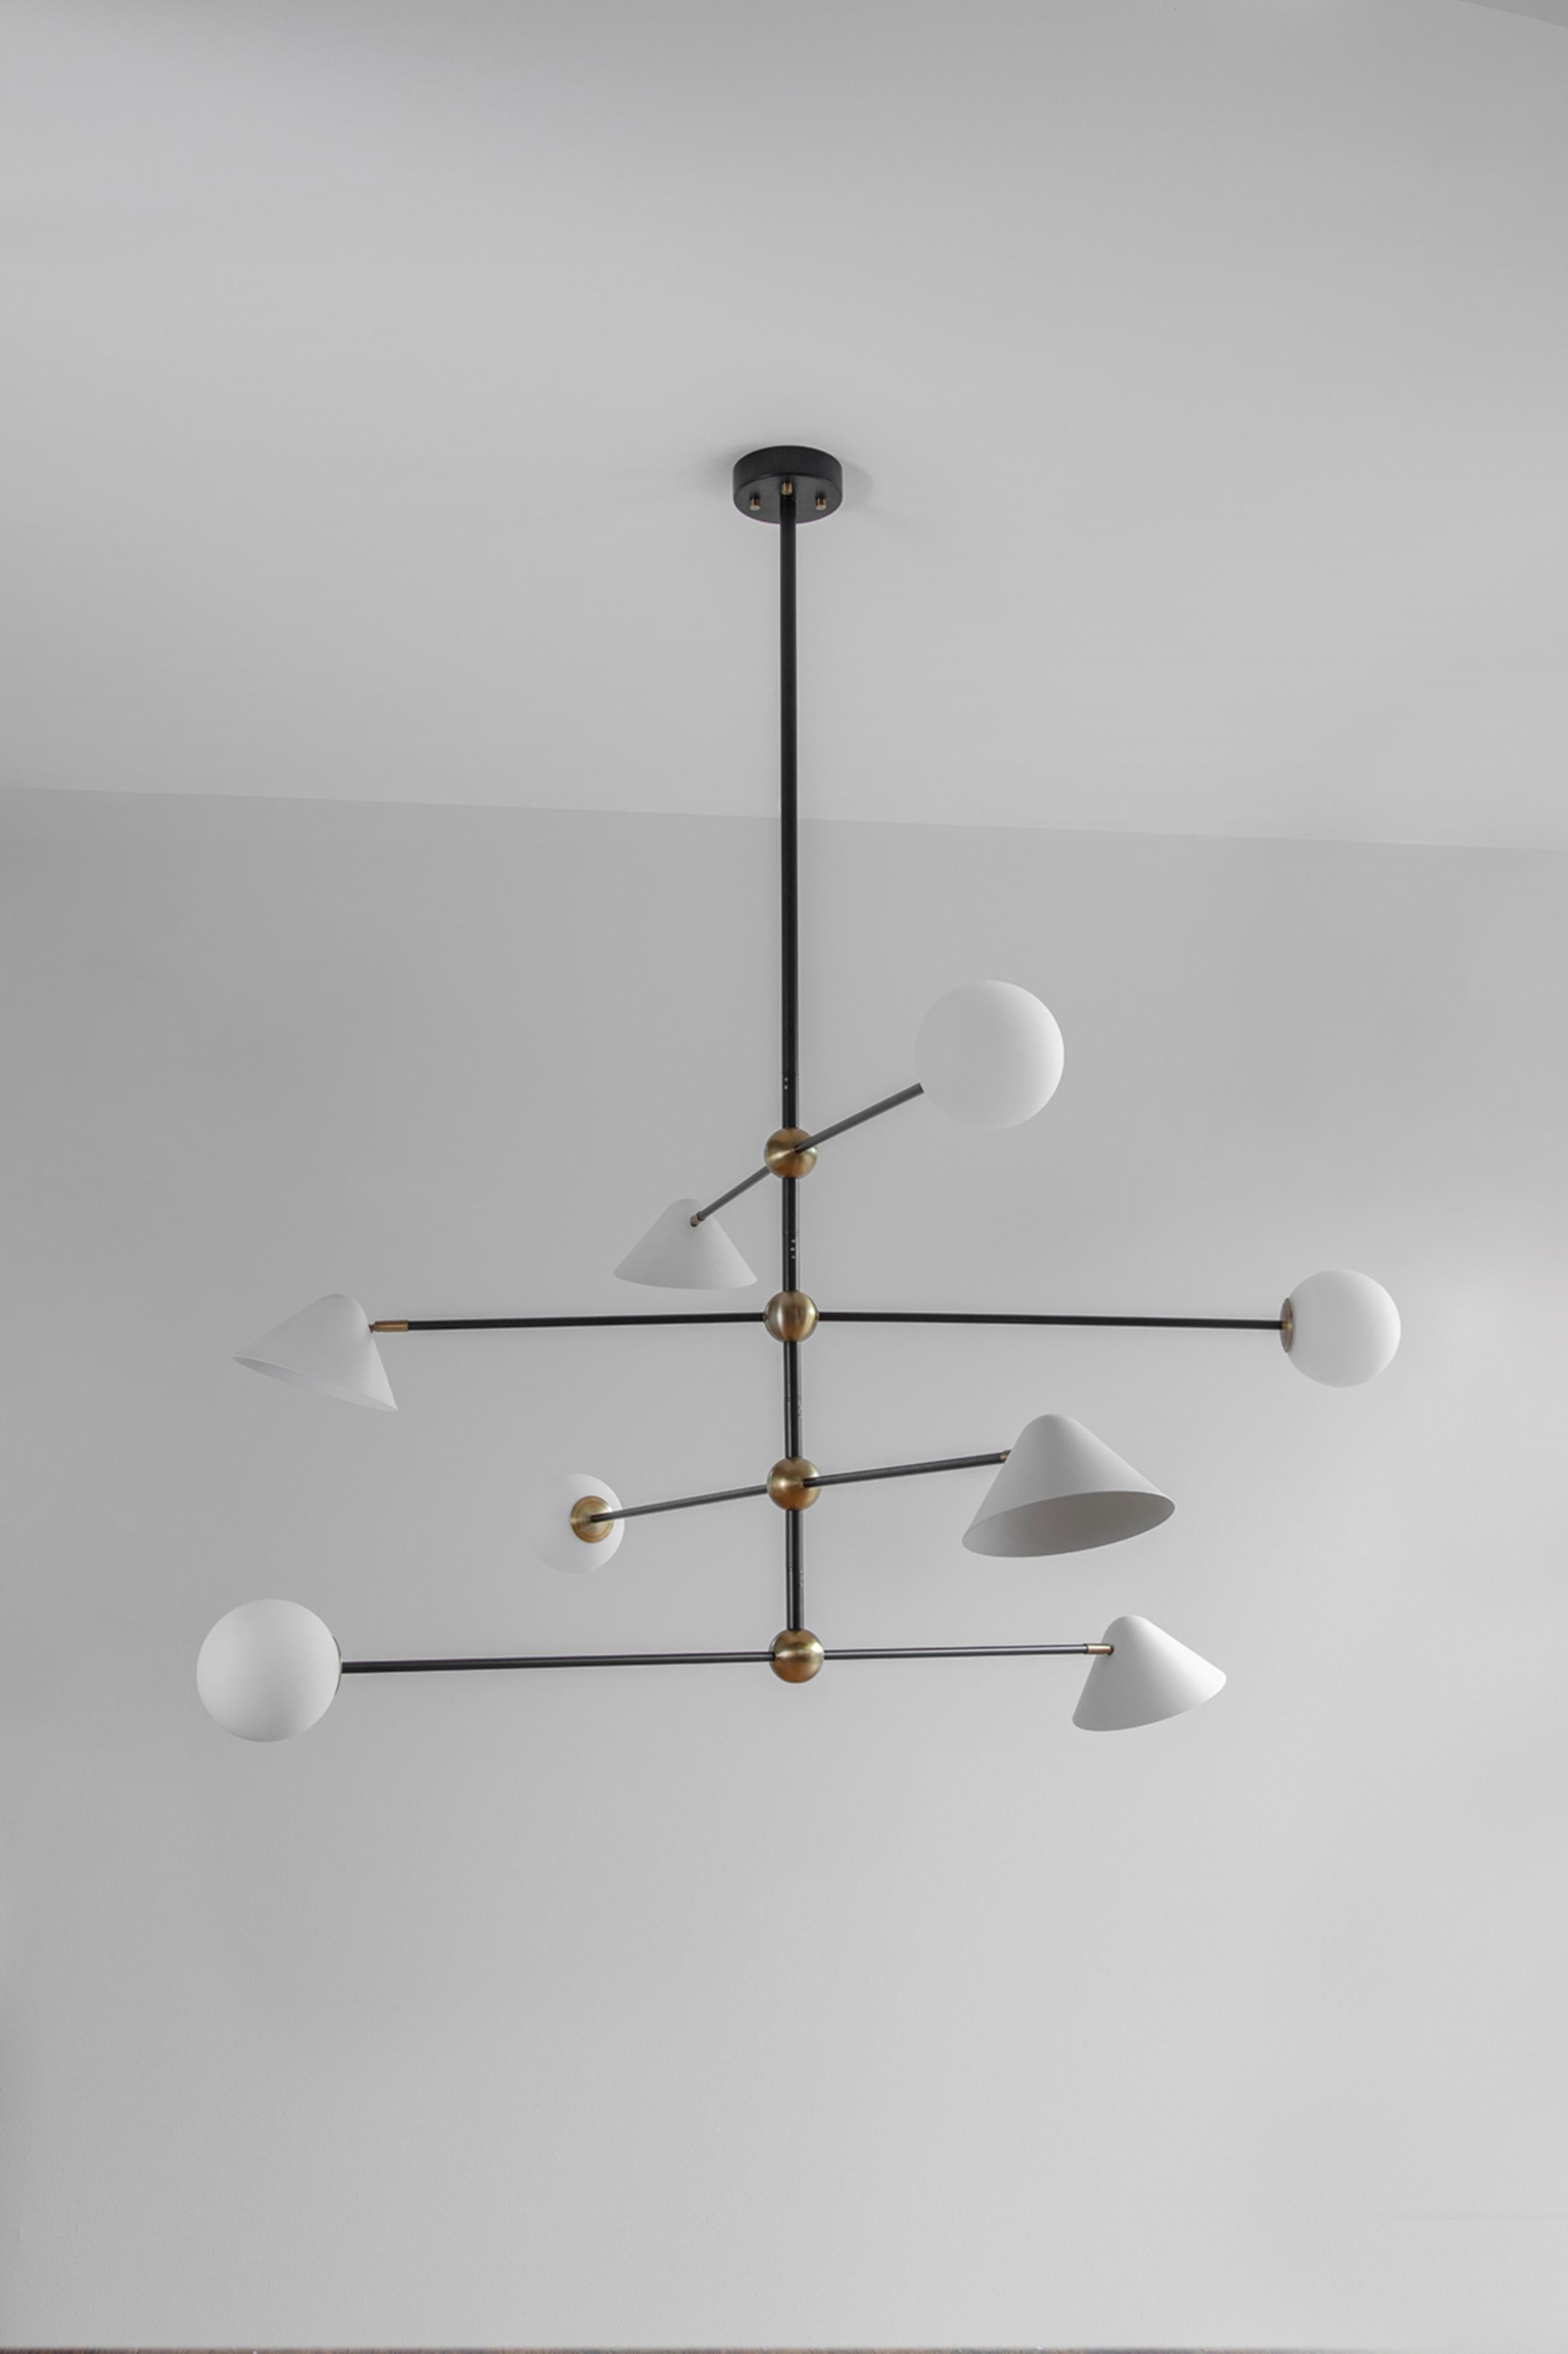 Brass Ball and Shade Pendant Light by Square in Circle
Dimensions: W 160 x H 147 x D 160 cm
Materials: Black painted metal, white painted metal shade, antique brushed brass, white frosted glass

This modern pendant light can be customized to